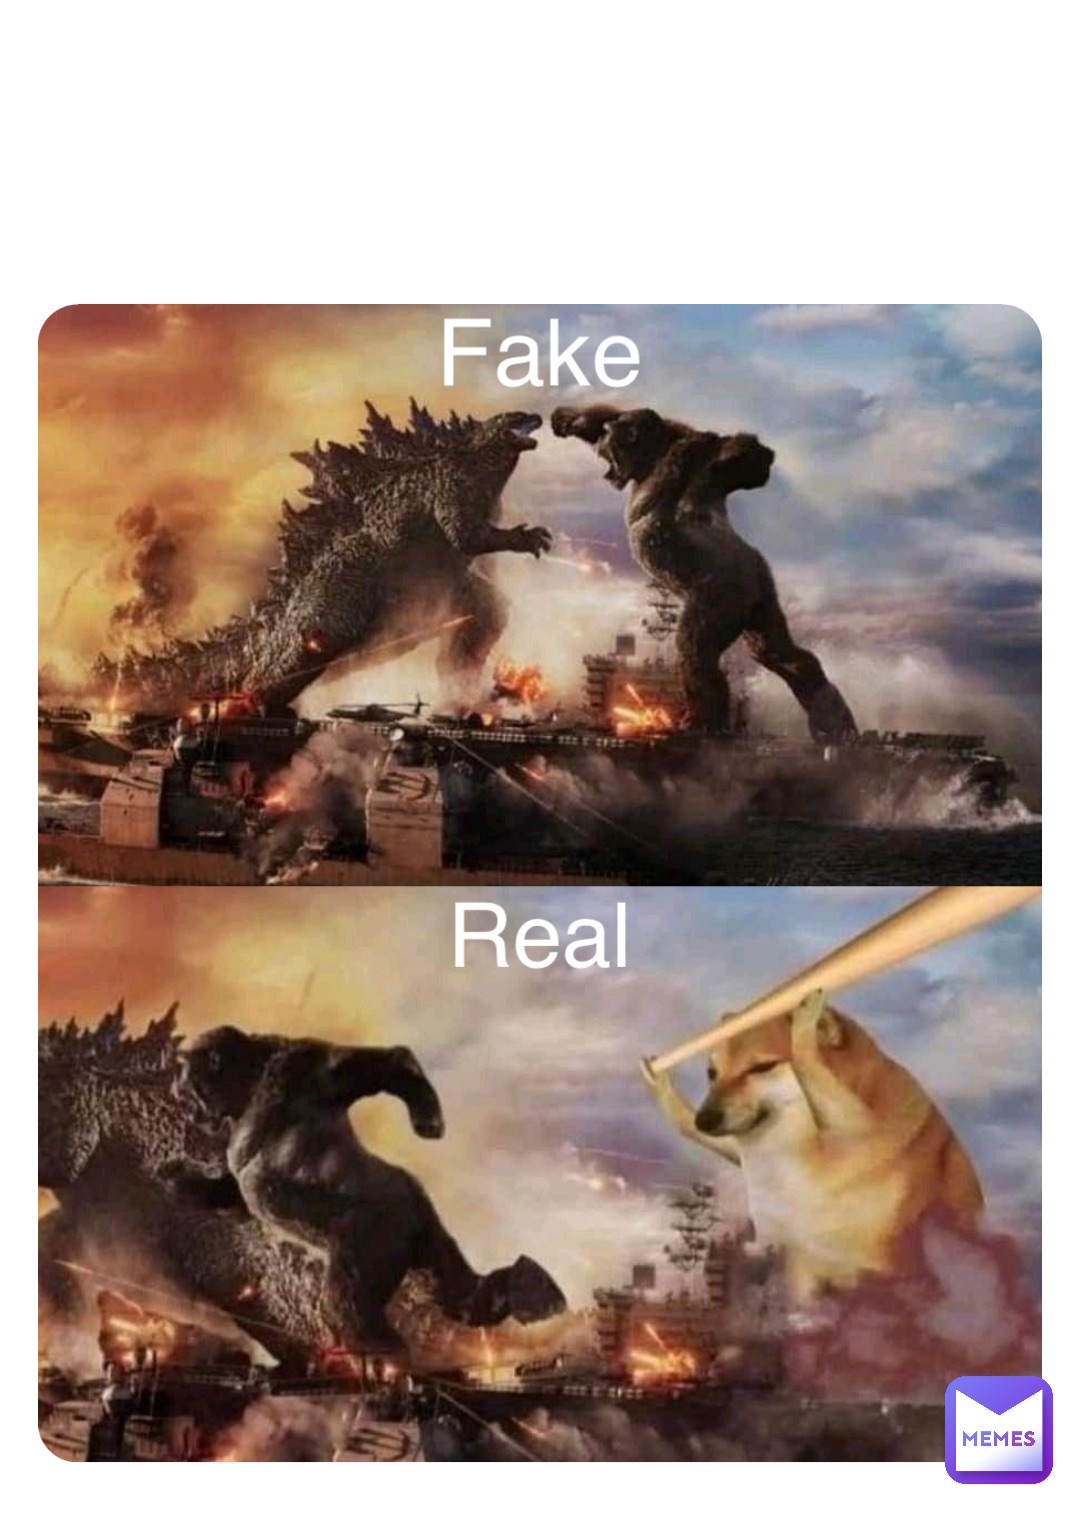 Double tap to edit Fake Real